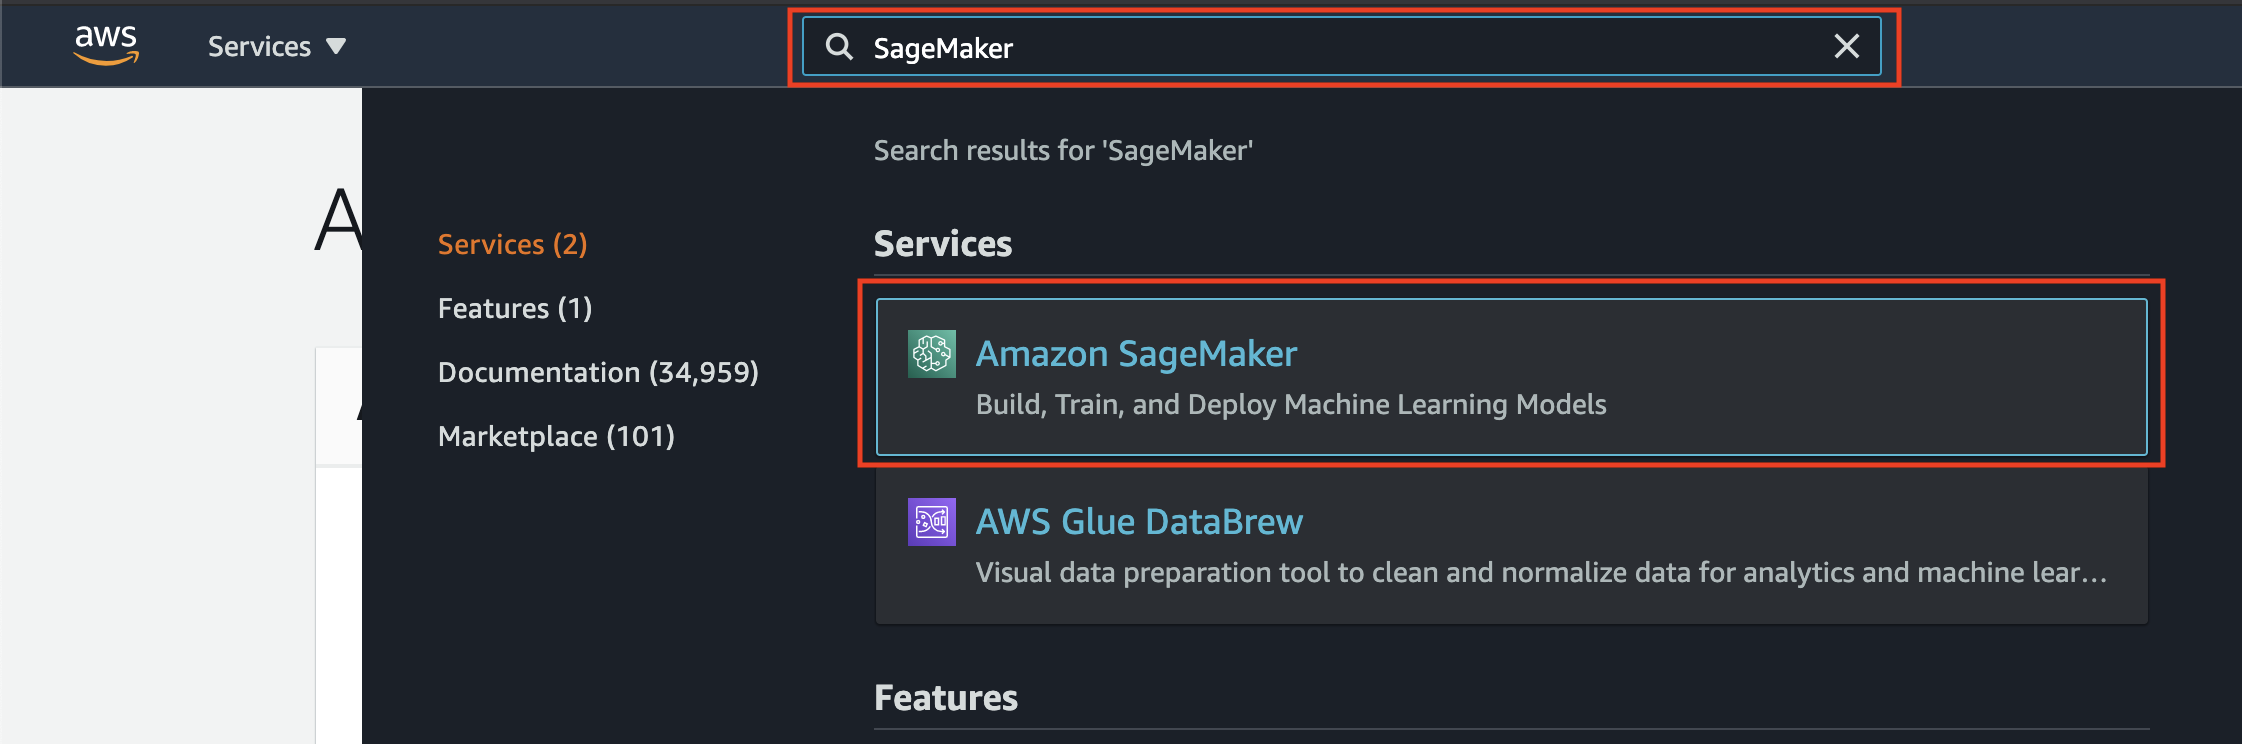 aws_console_search_sm.png